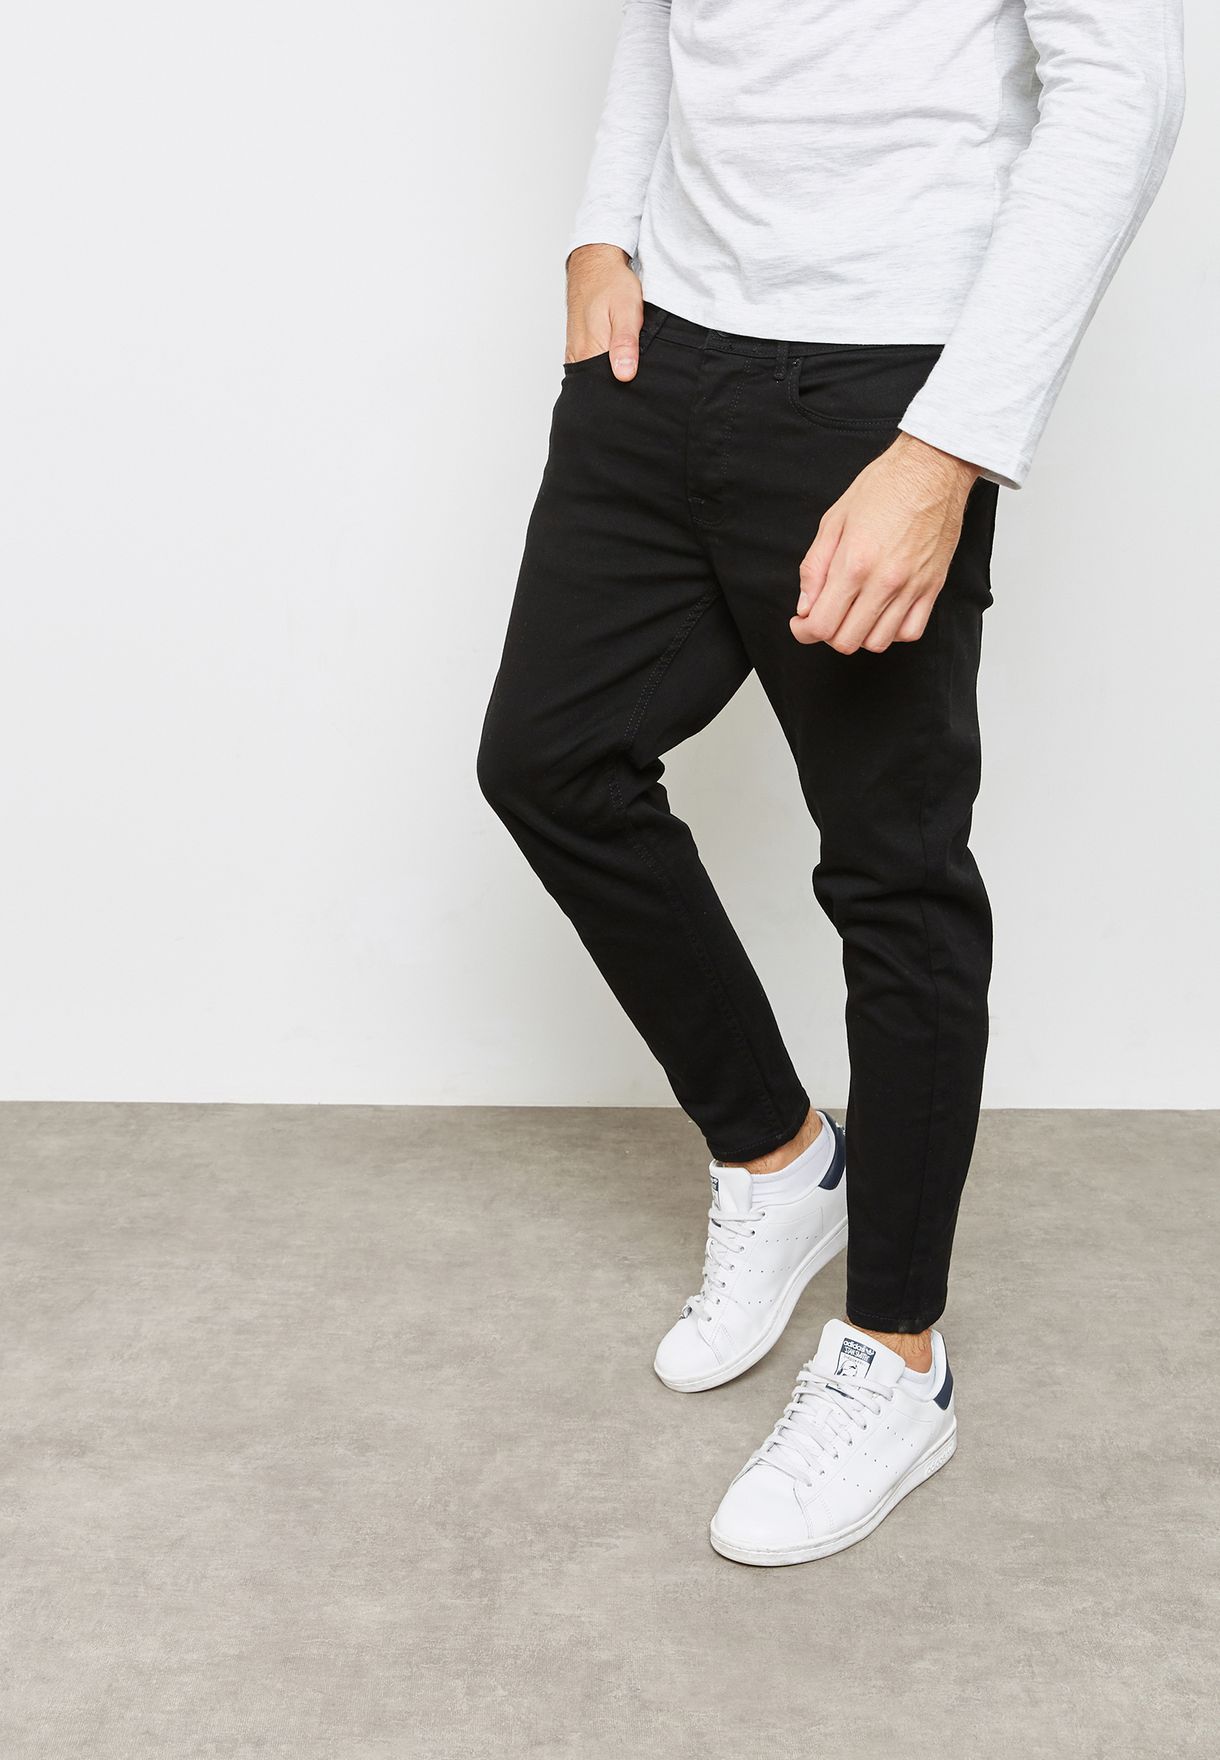 mens cropped jeans skinny